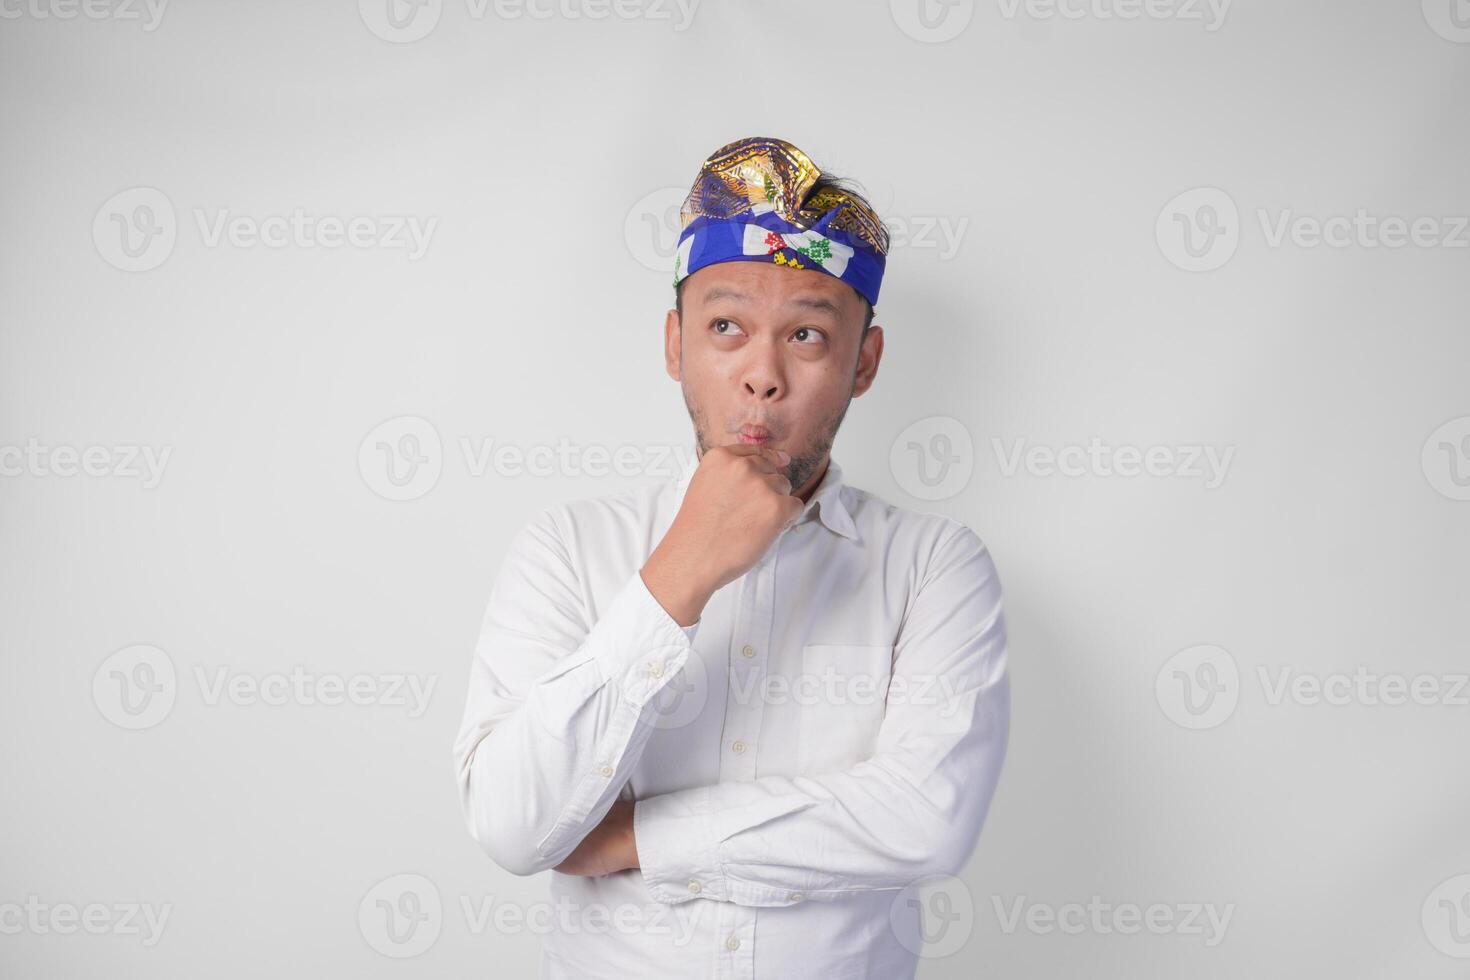 Confused Balinese man in traditional headdress called udeng thinking hard while touching chin with serious expression, isolated by white background photo